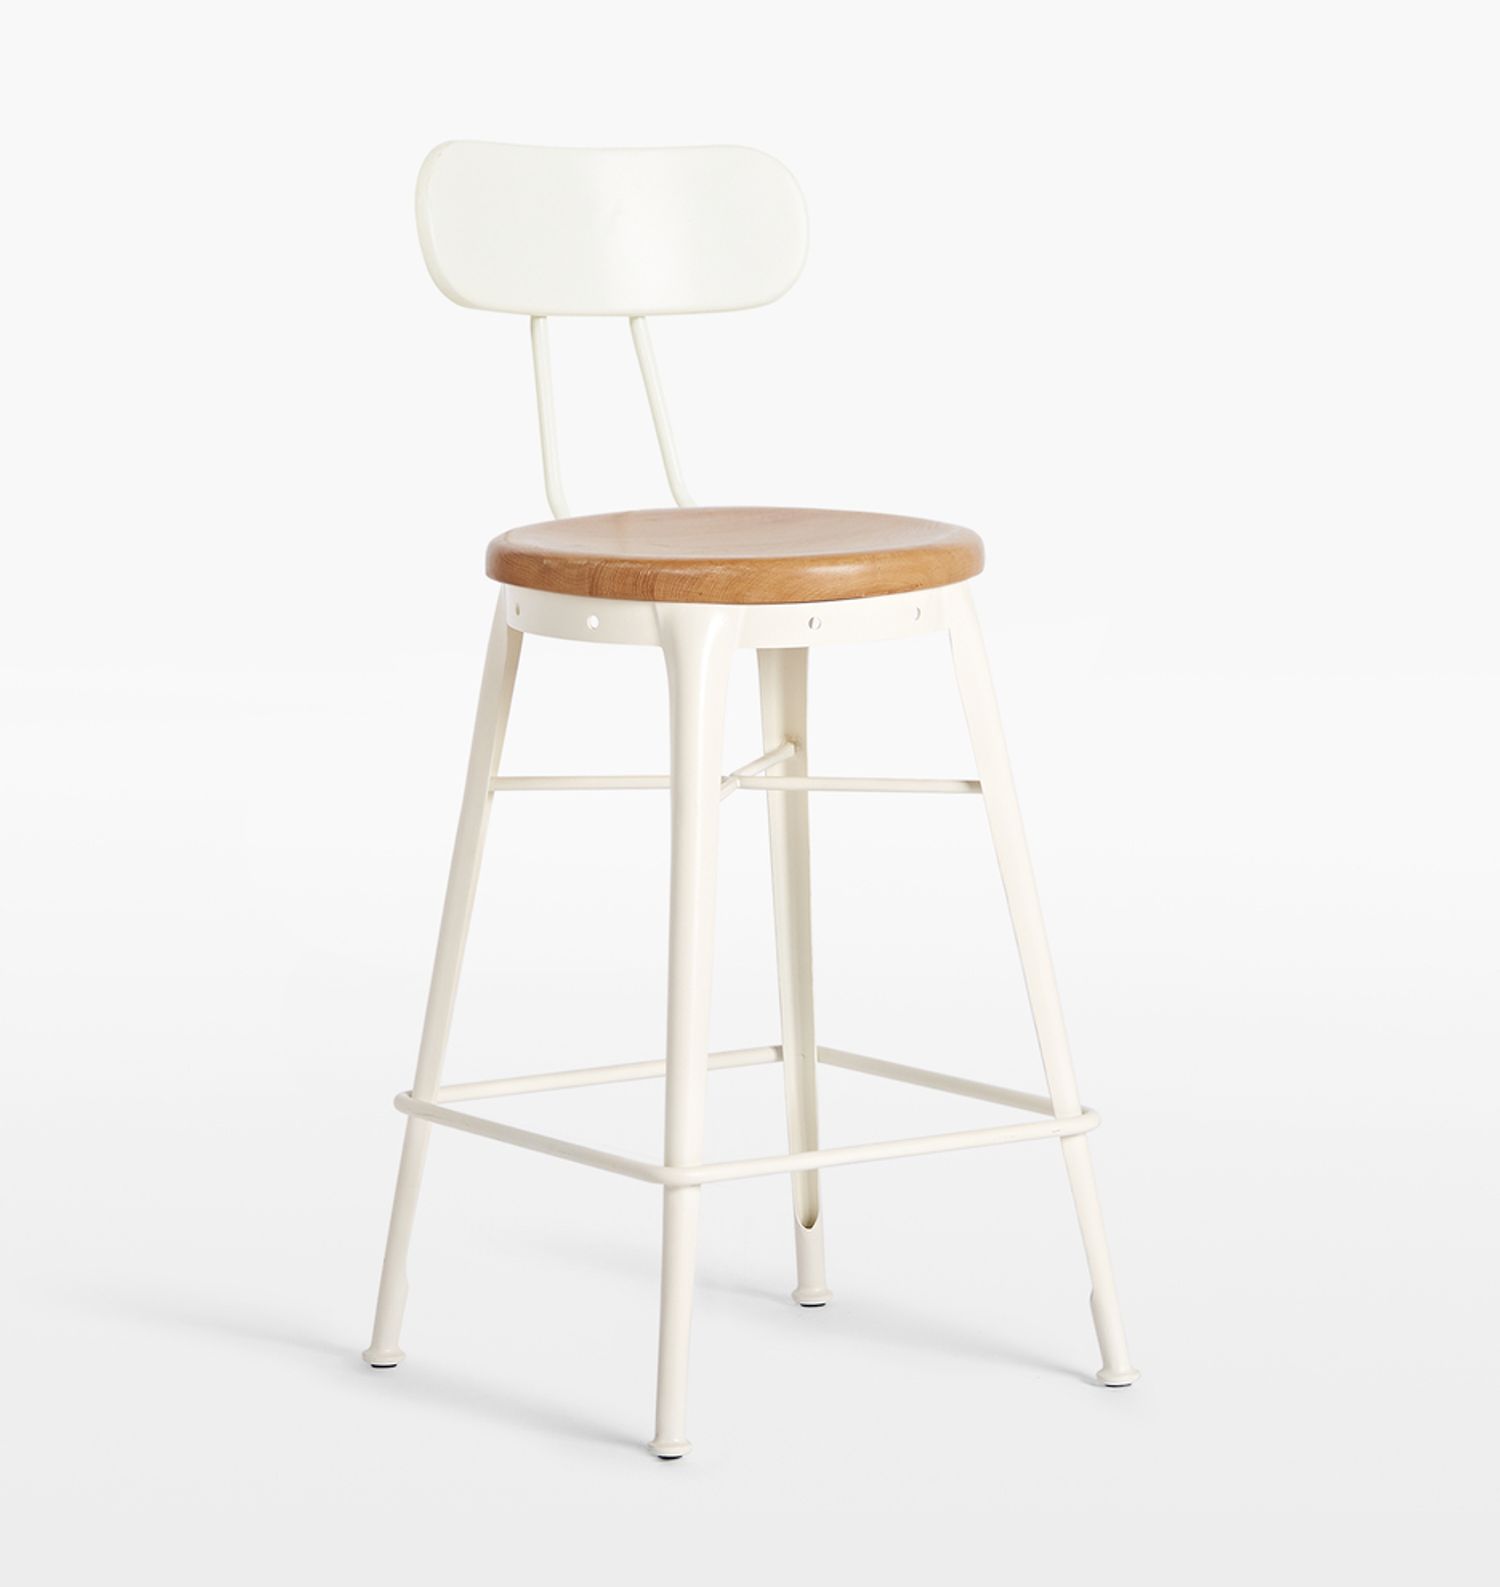 Shop Cobb Counter Stool with Back in Bright White and Oak from Rejuvenation on Openhaus